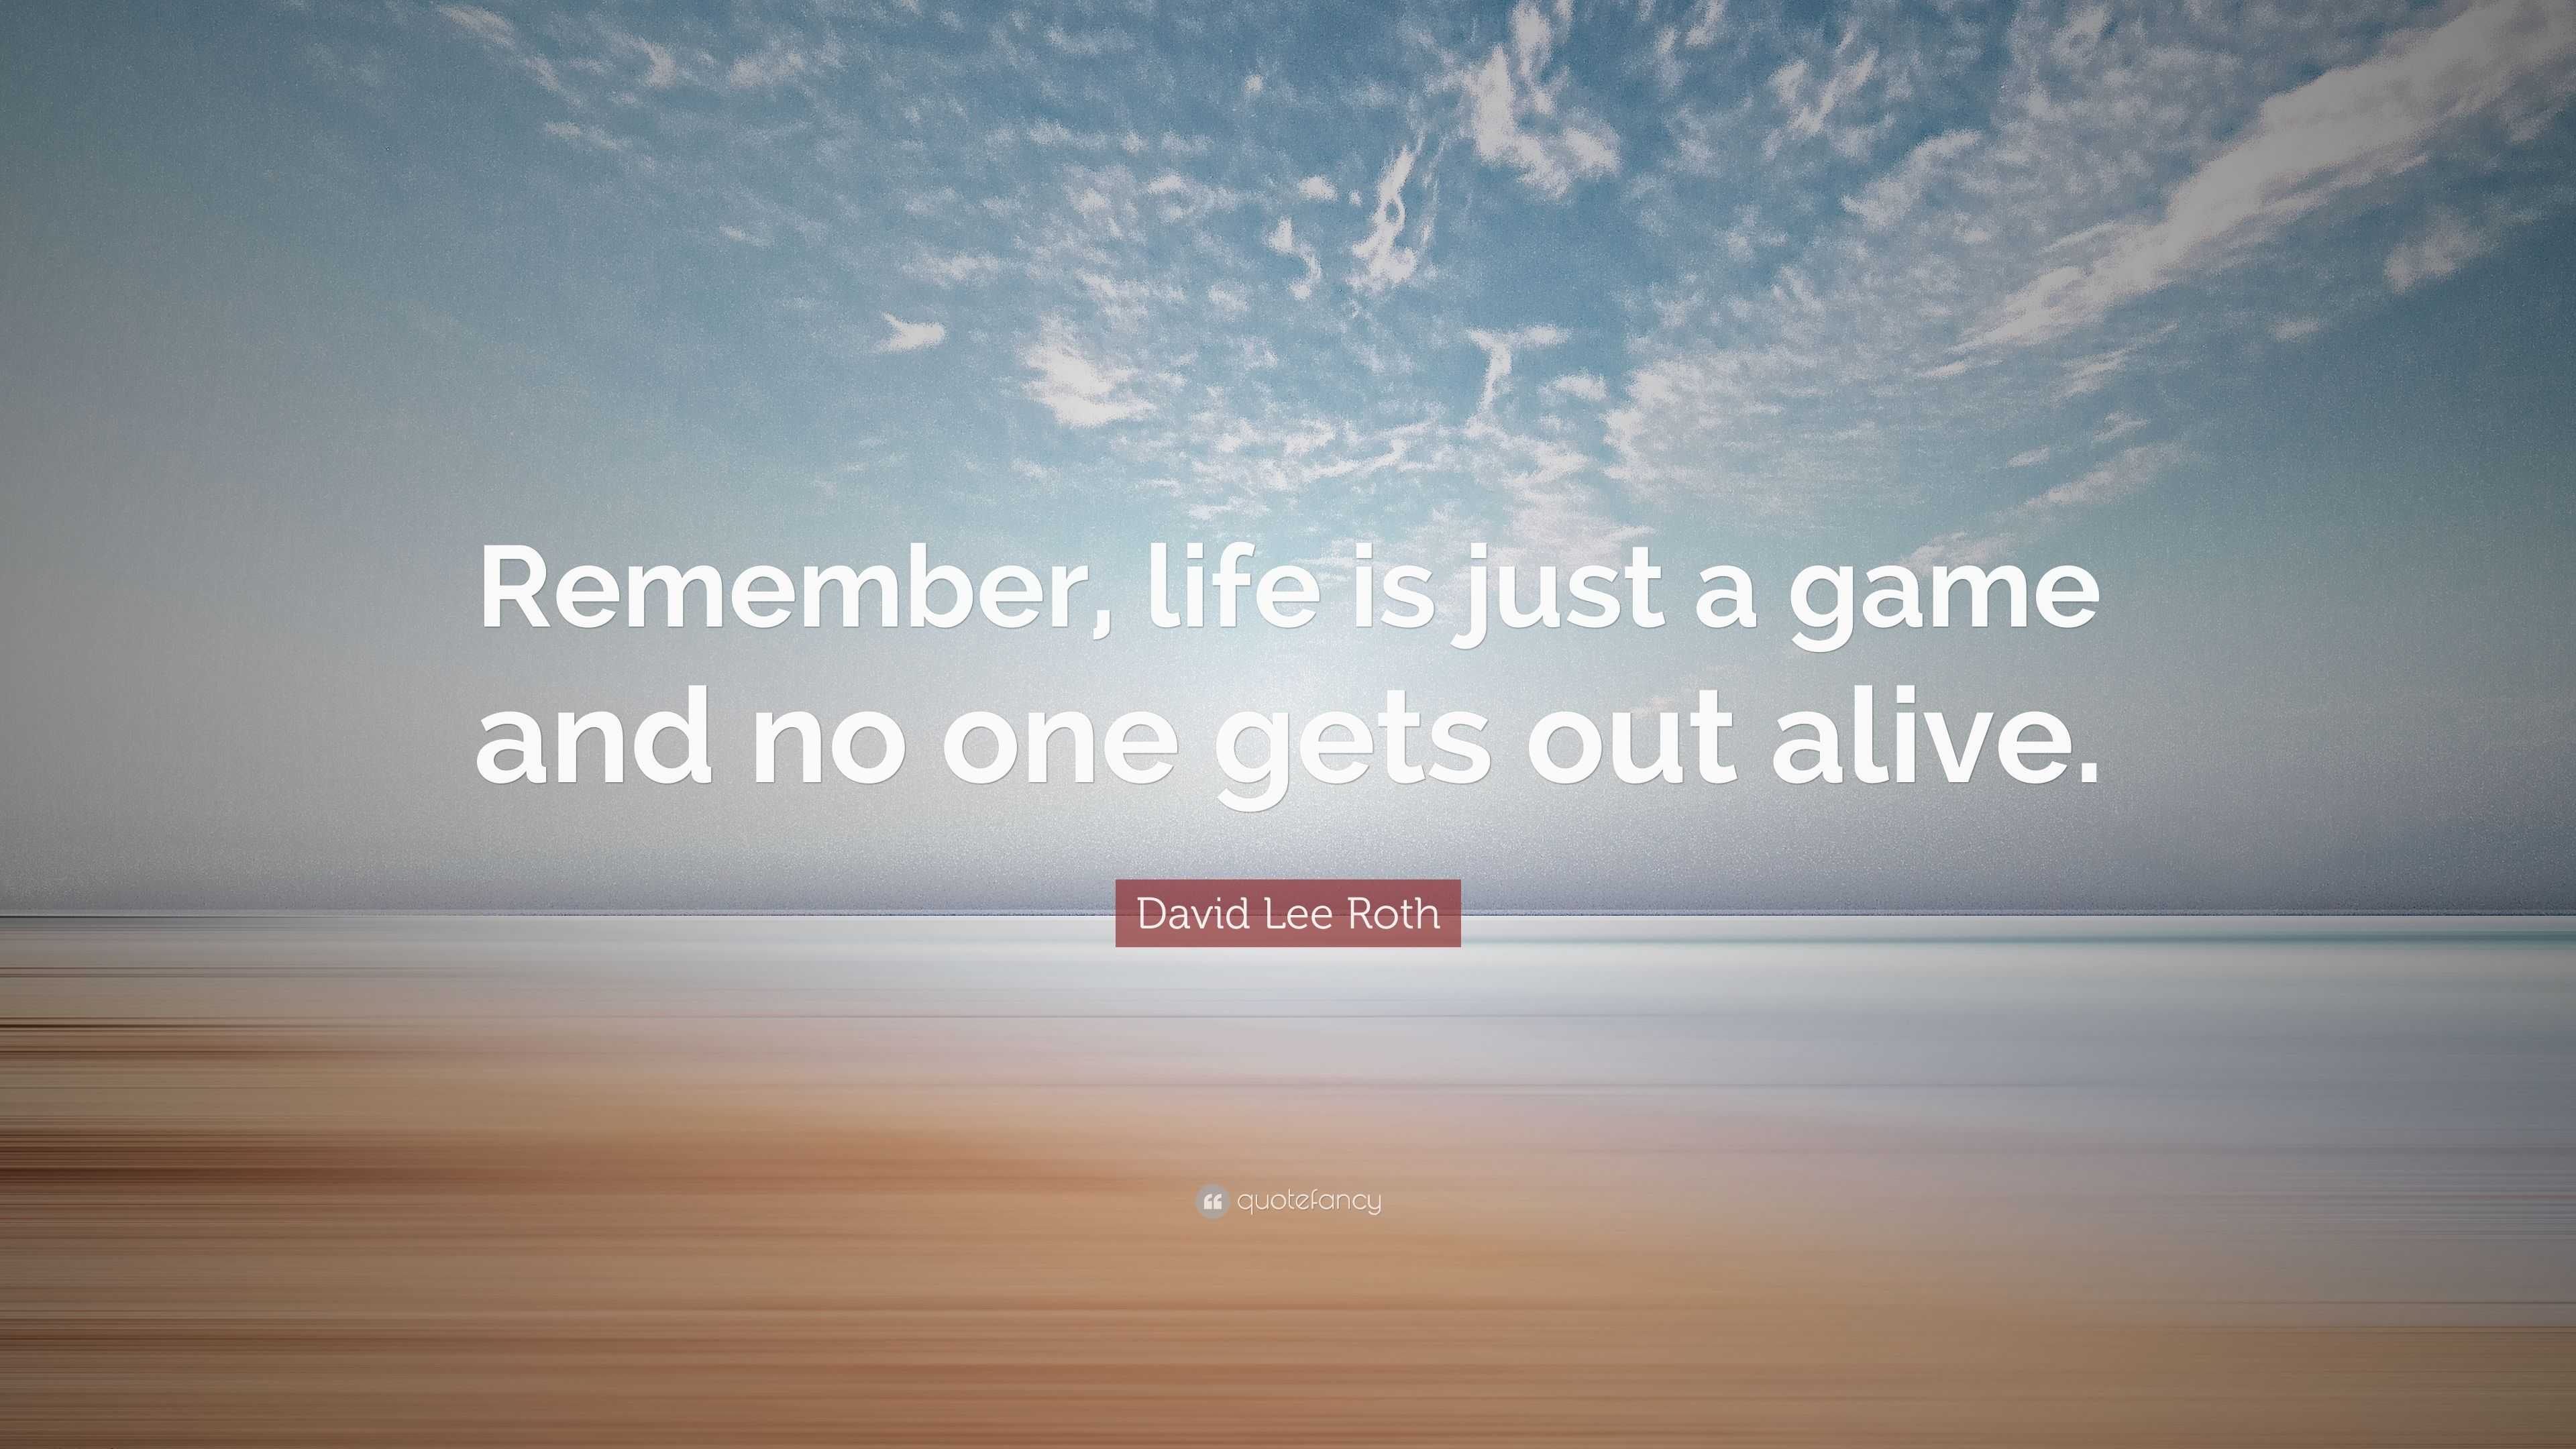 David Lee Roth quote: Remember, life is just a game and no one gets